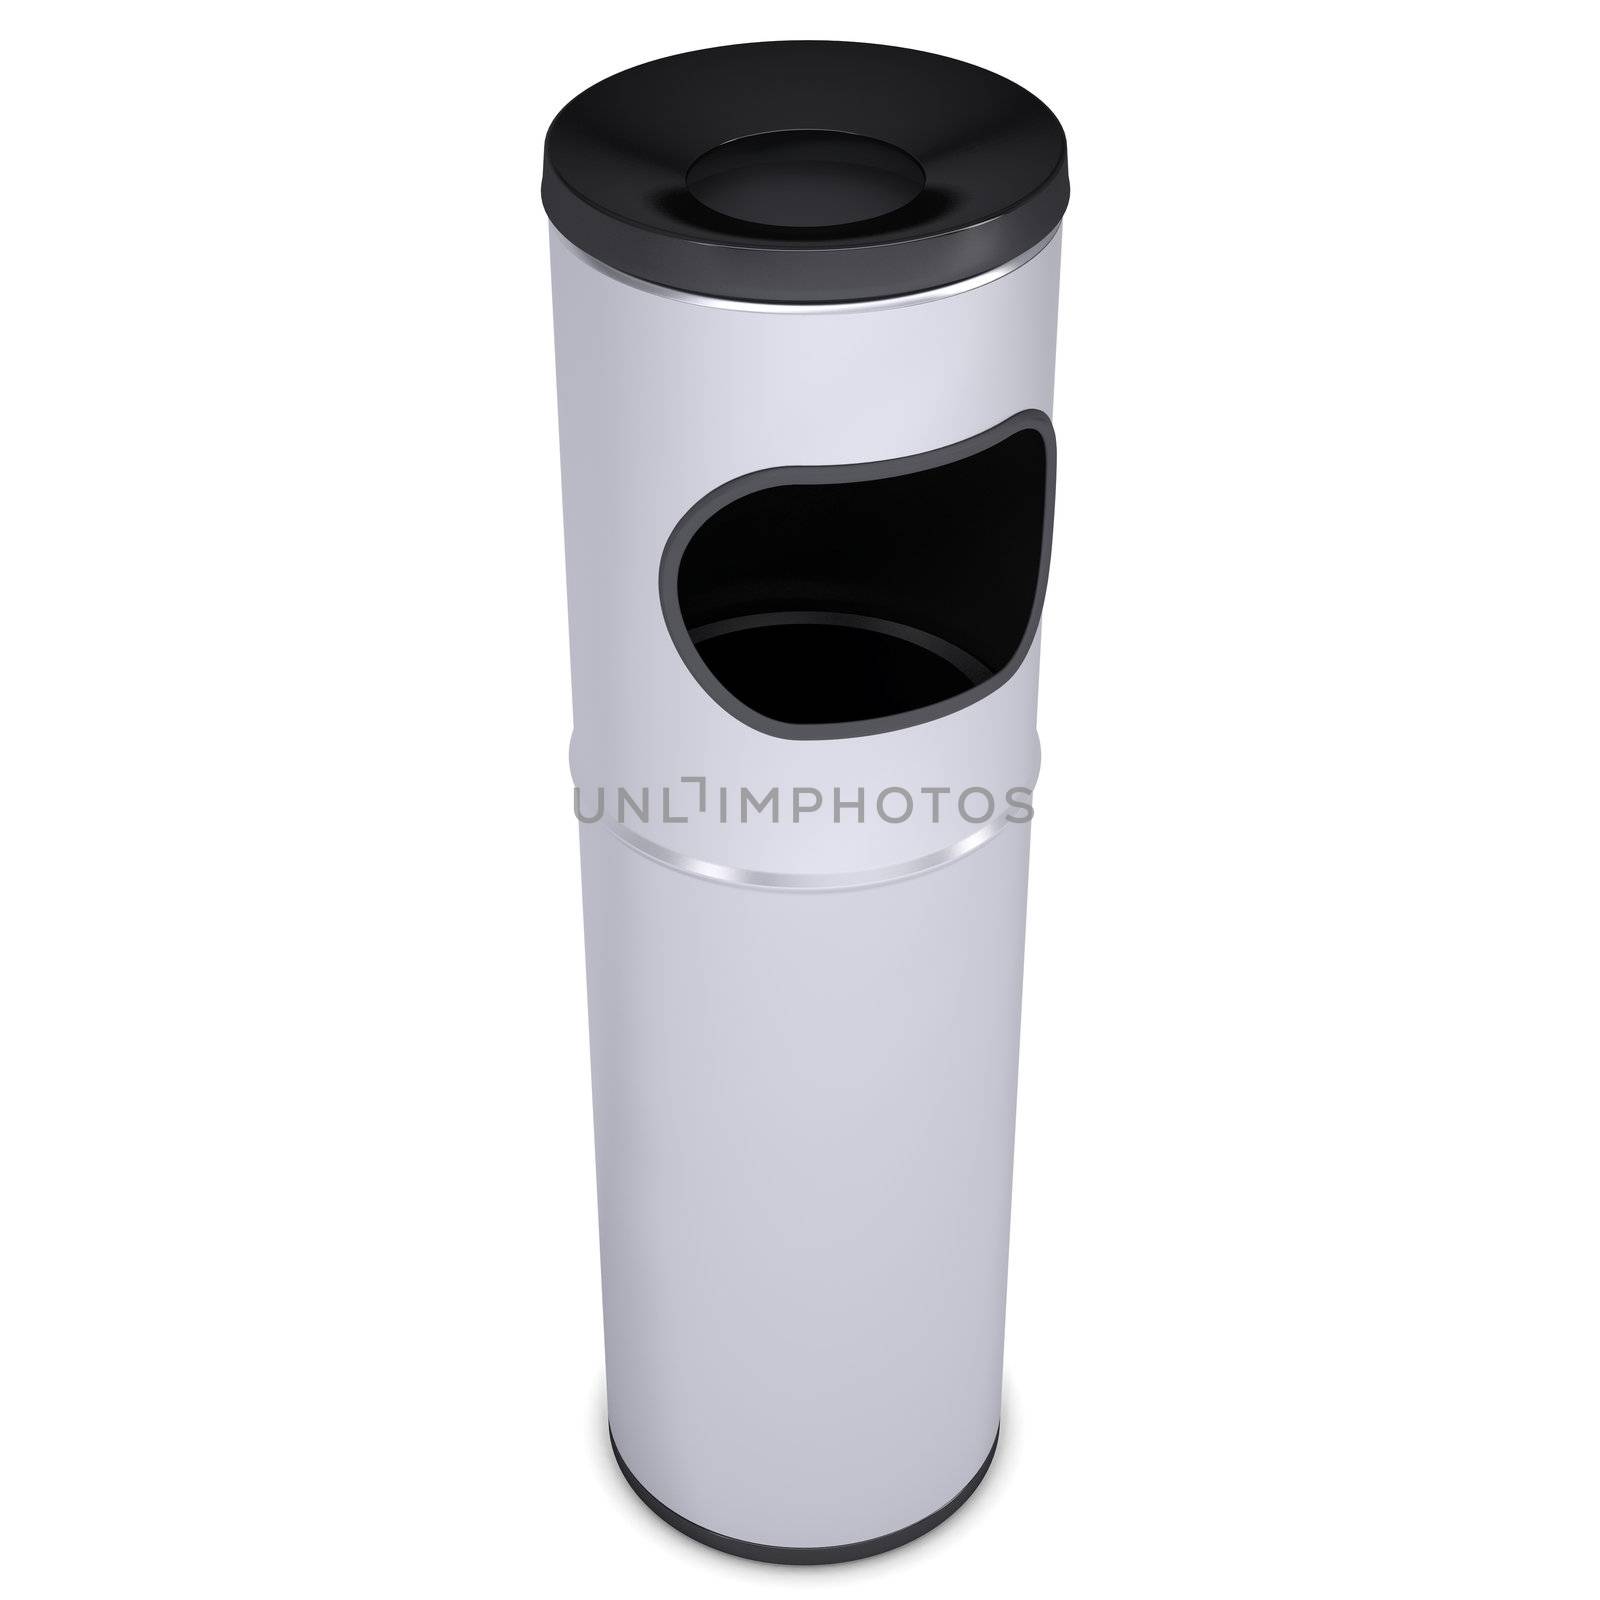 Metal waste bin. Isolated render on a white background